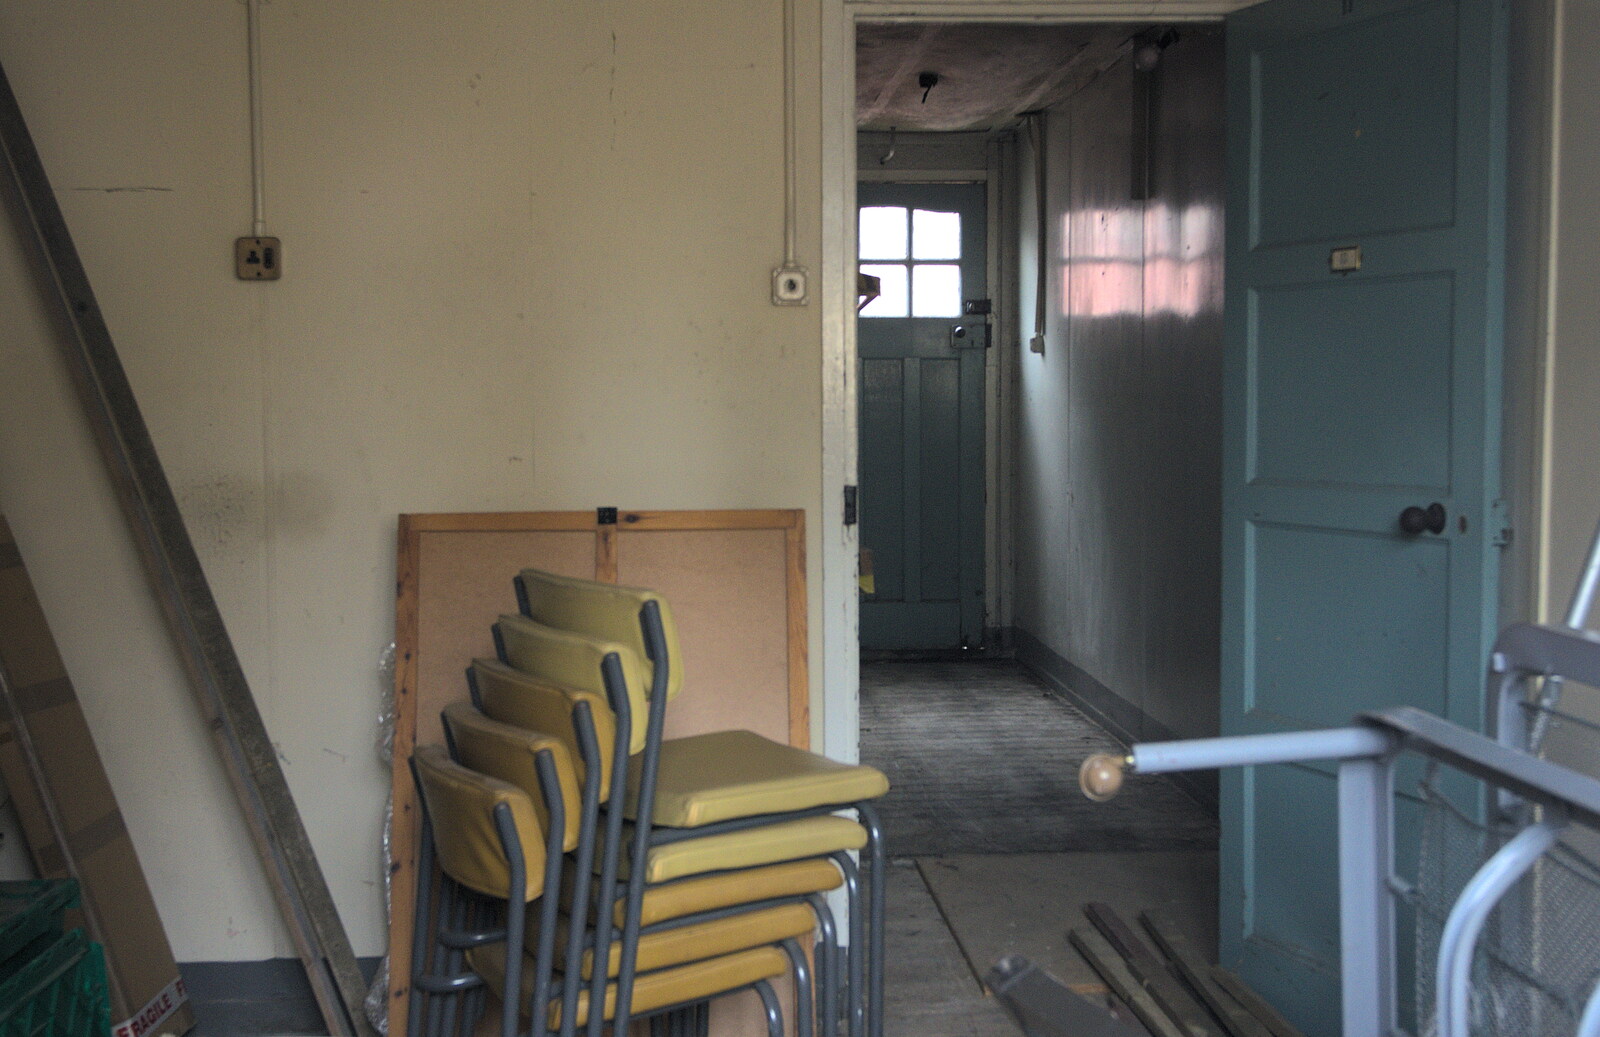 A stack of chairs in a derelict hut from TouchType does Bletchley Park, Bletchley, Bedfordshire - 20th July 2012